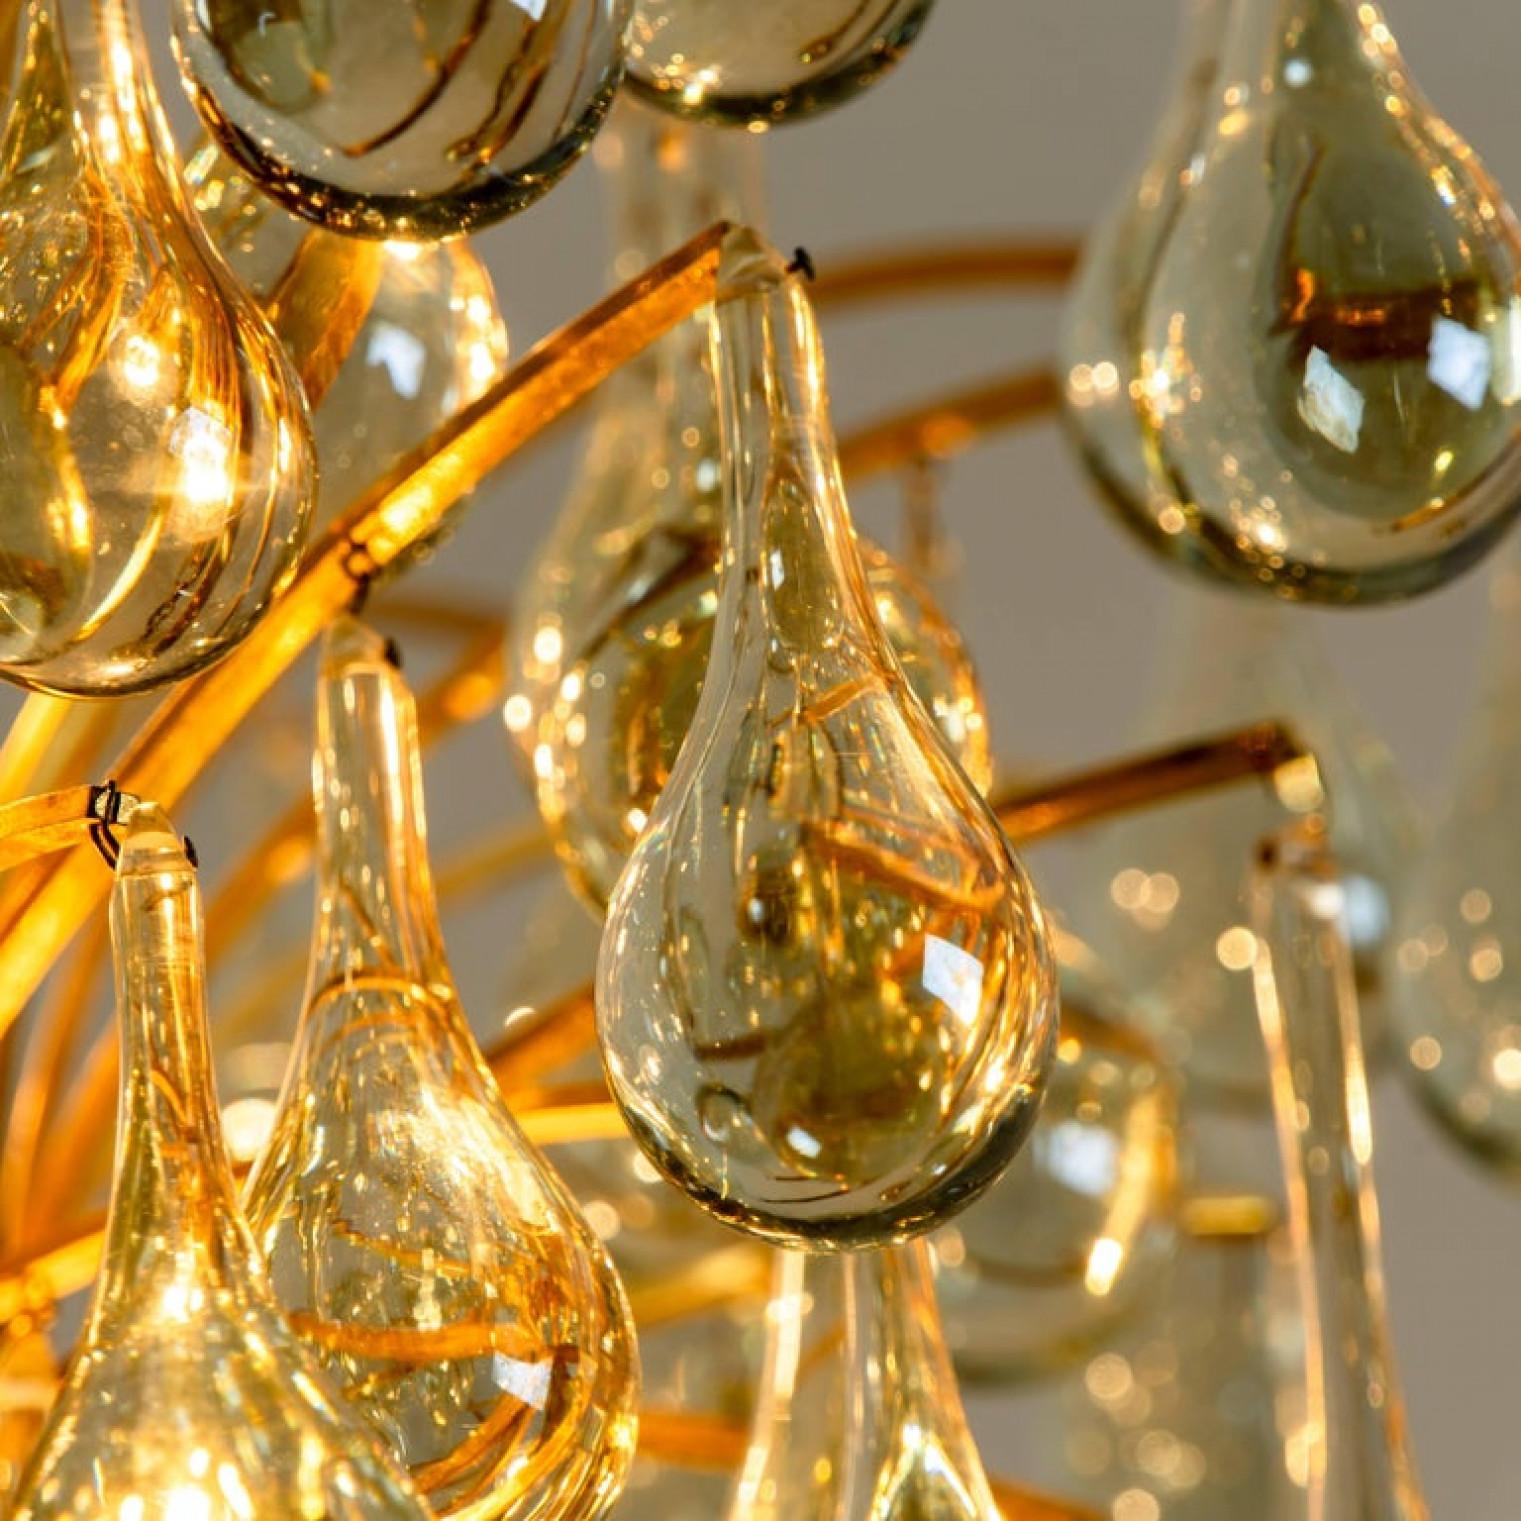 Mid-Century Modern 1 of the 2 Large Brass and Crystal Chandeliers, Ernst Palme, Germany, 1970s For Sale